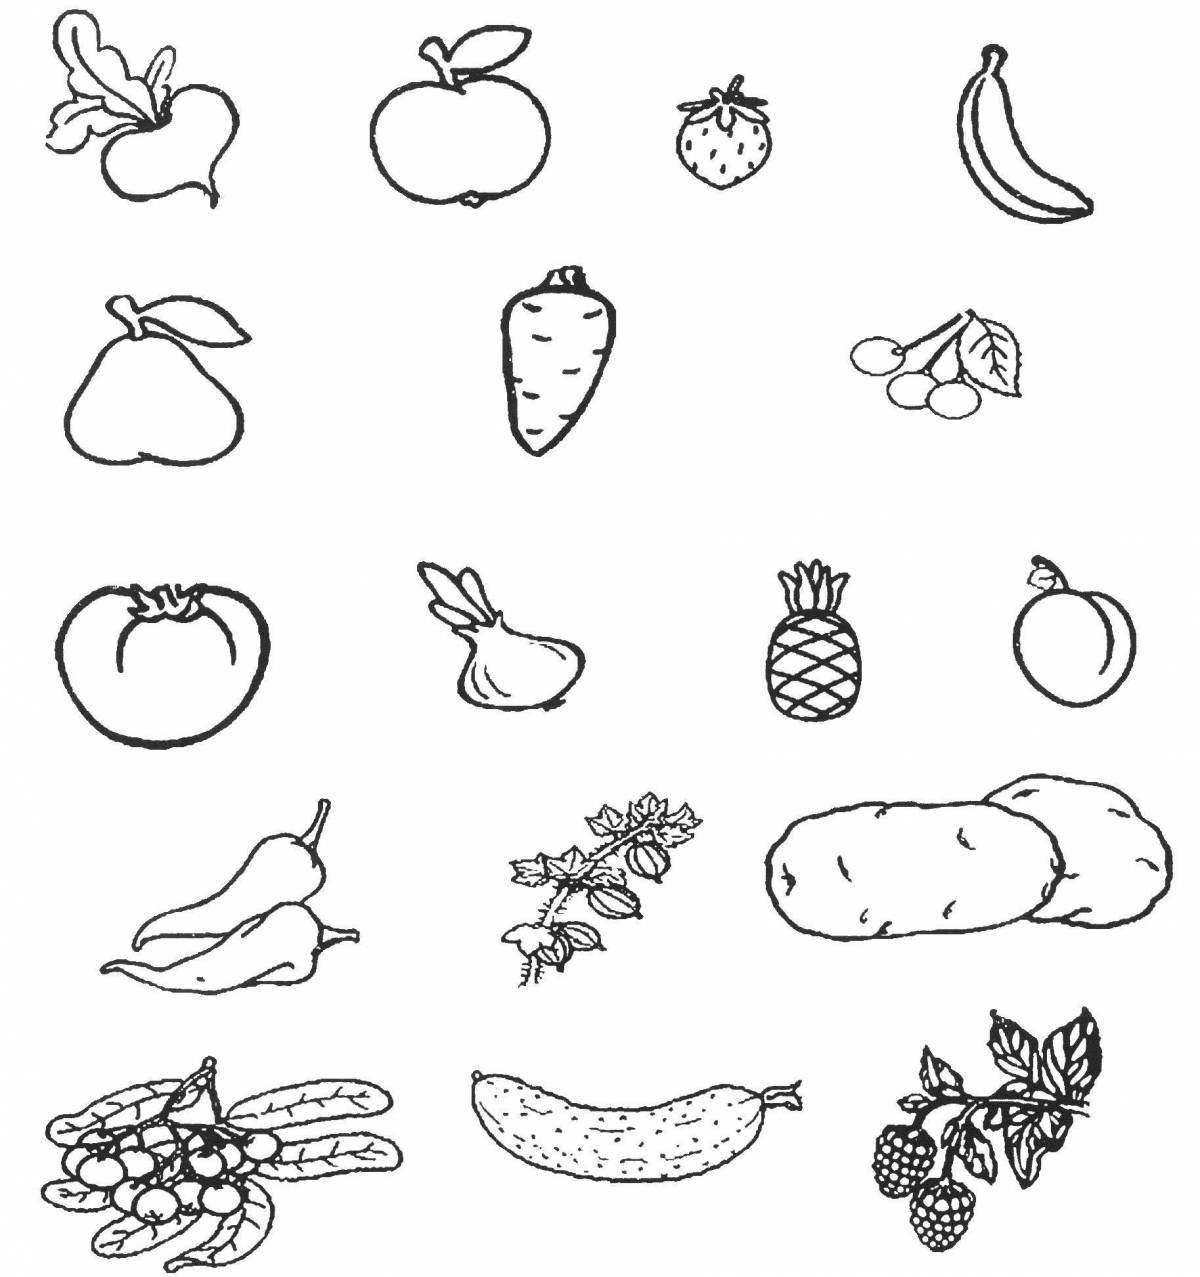 Unique vegetable coloring book for kids 6-7 years old